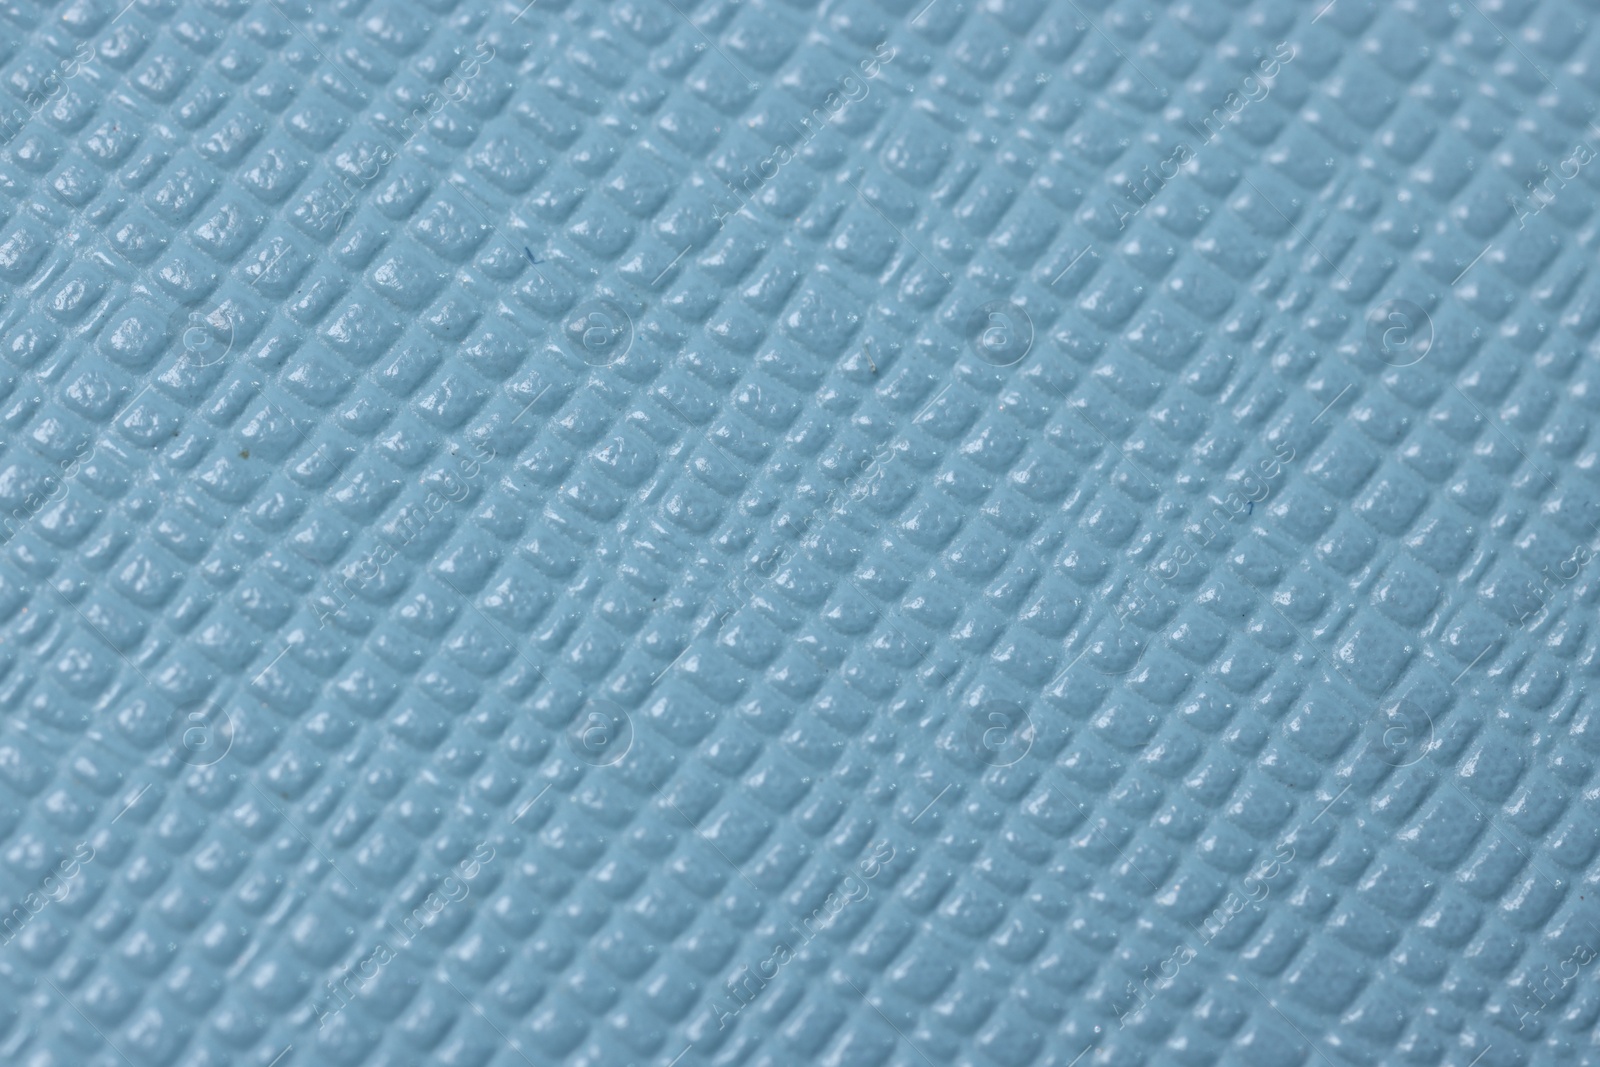 Photo of Light blue leather as background, top view